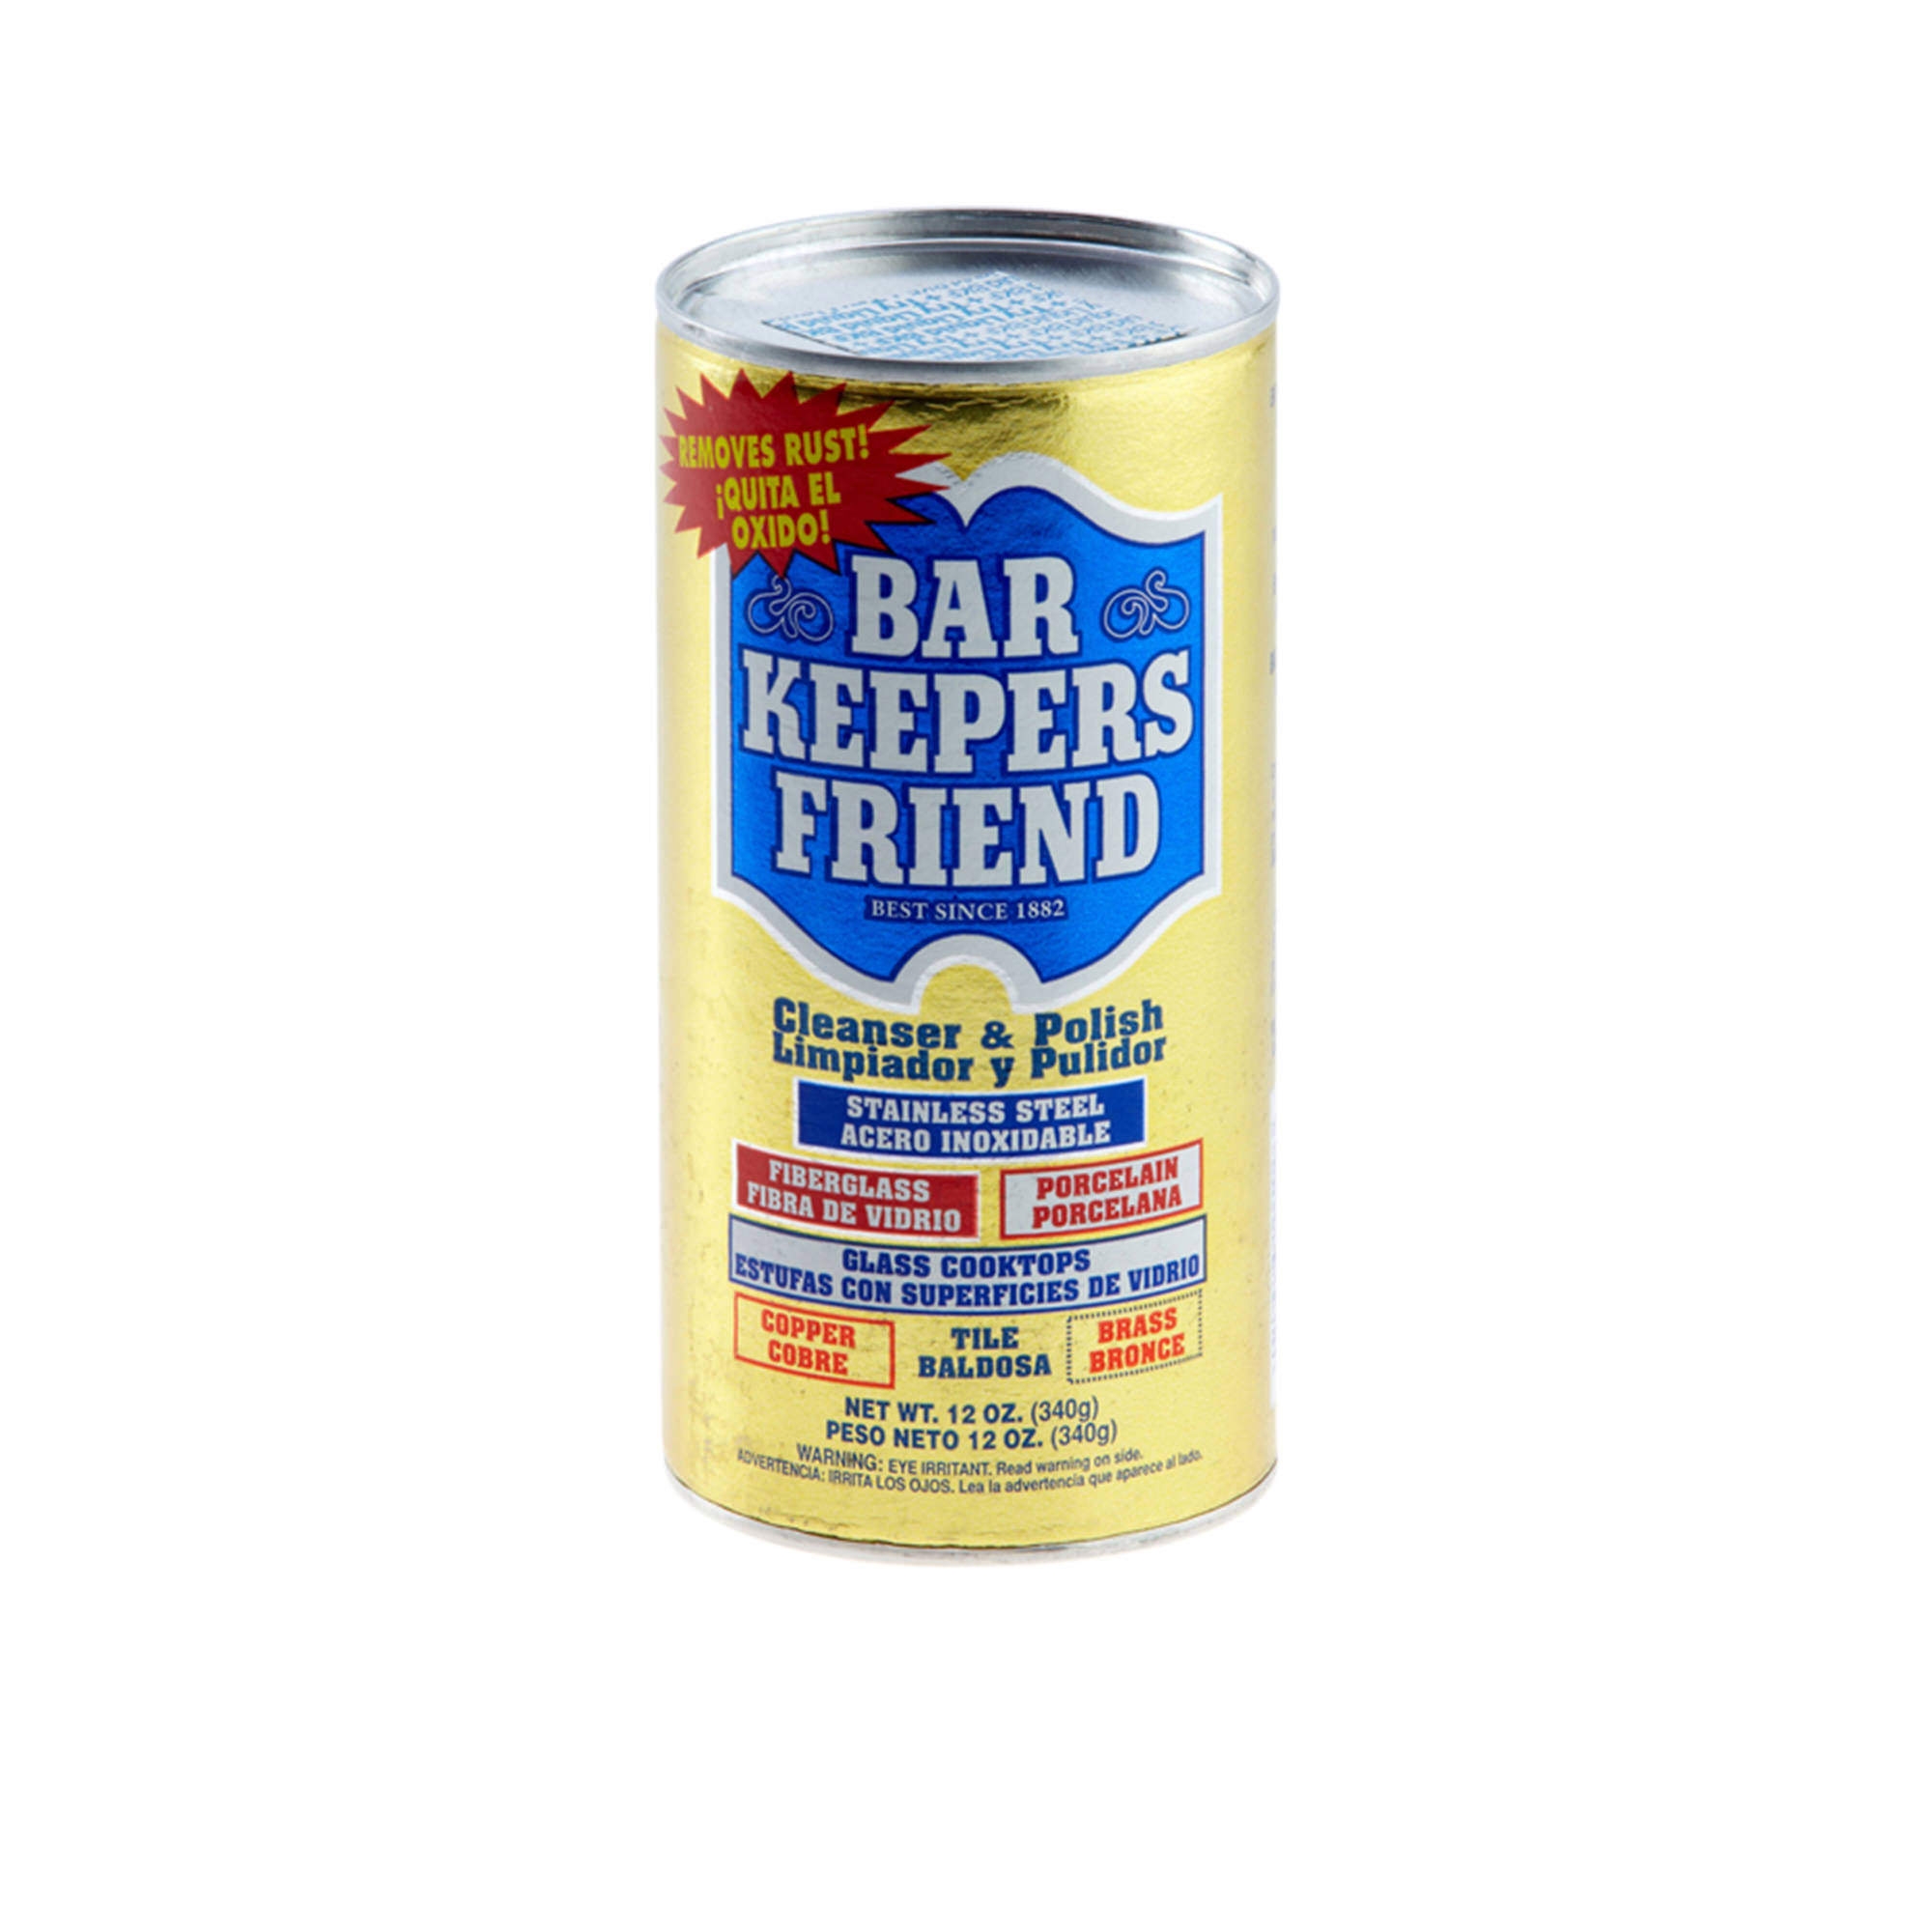 Bar Keepers Friend Cleanser 340g Image 1